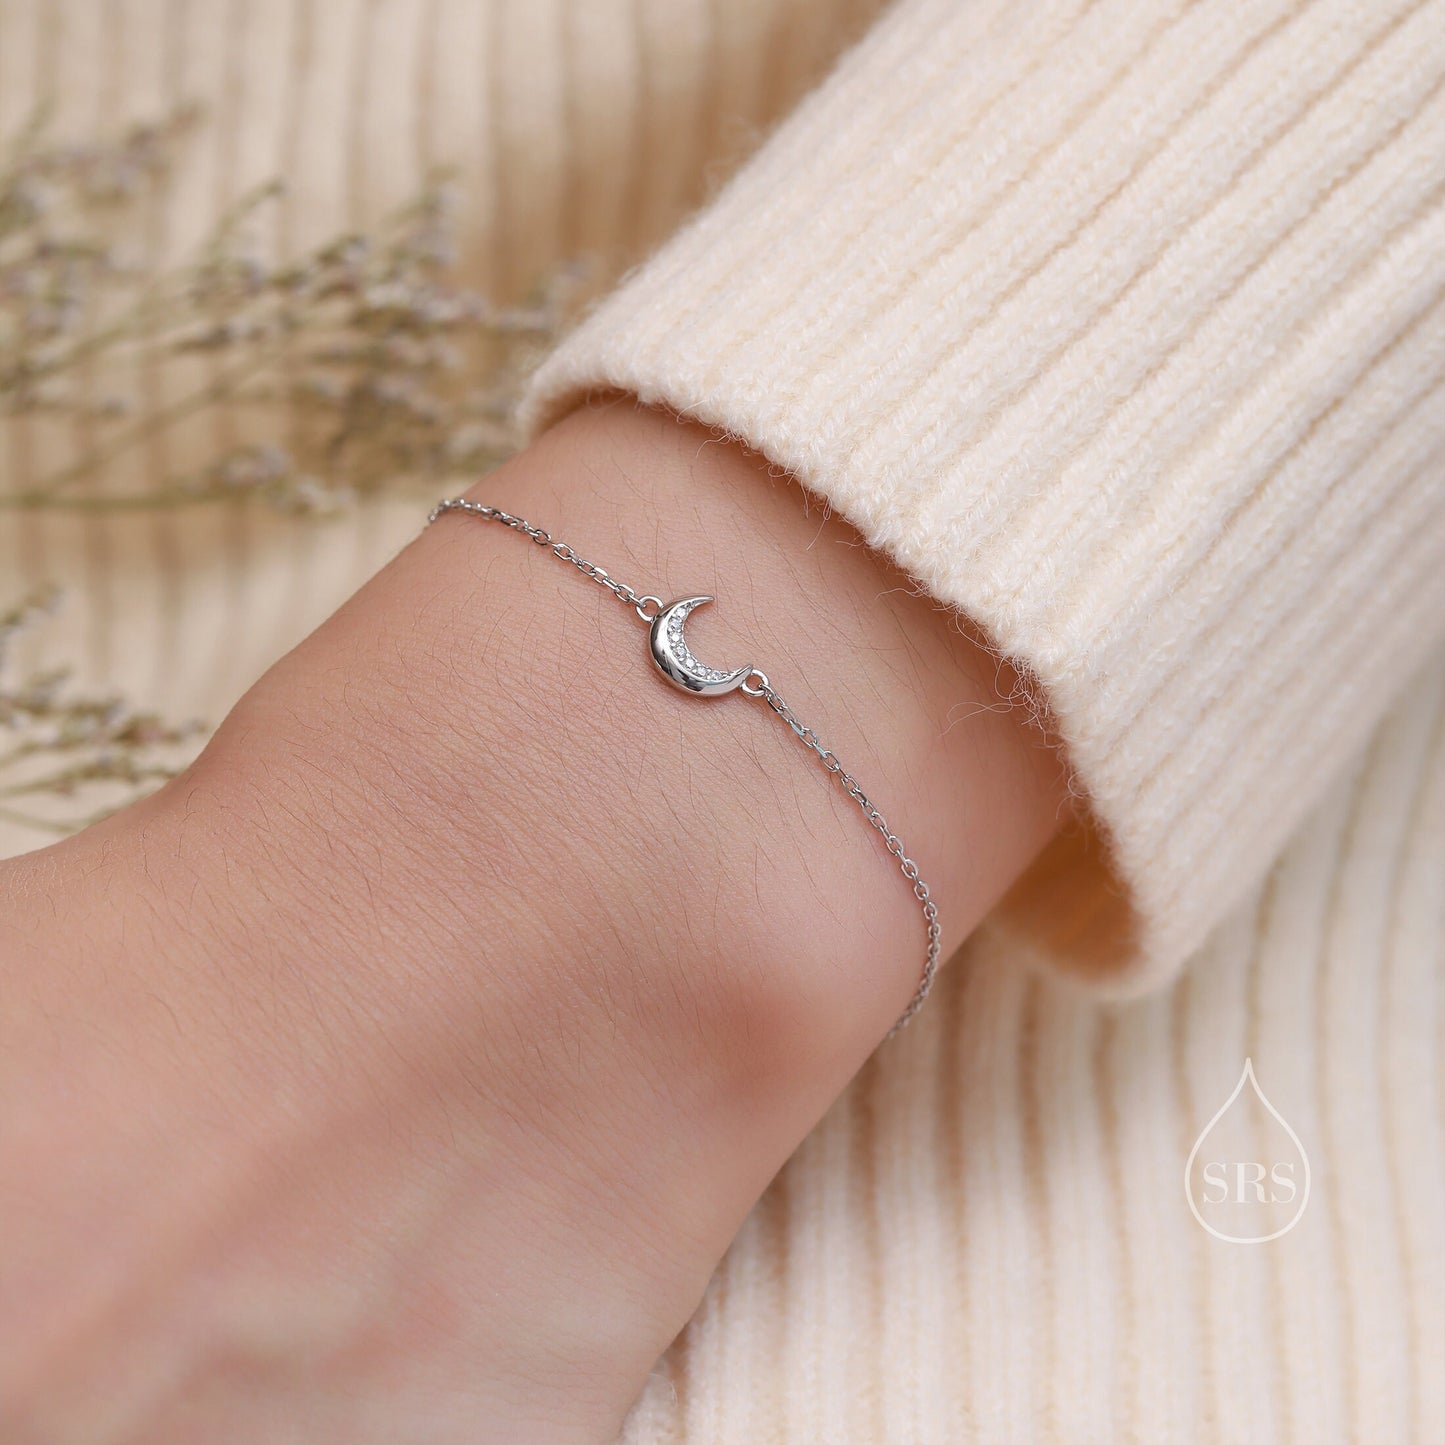 Extra Tiny Crescent Moon Bracelet in Sterling Silver, Silver or Gold, Silver Moon Bracelet, Moon Jewellery, Moon and Star